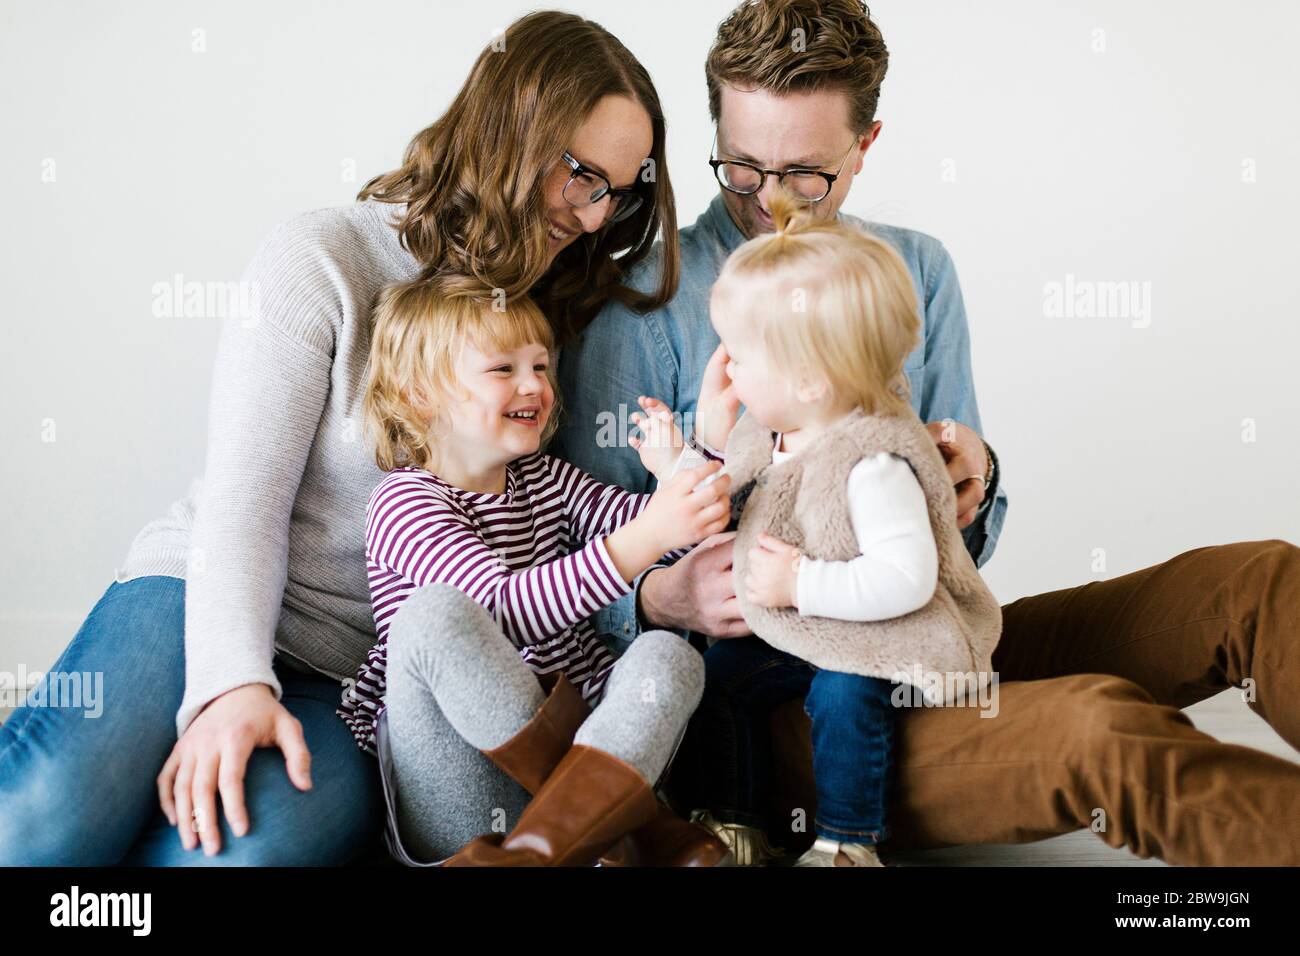 Portrait of family with daughters (2-3, 6-7) Stock Photo